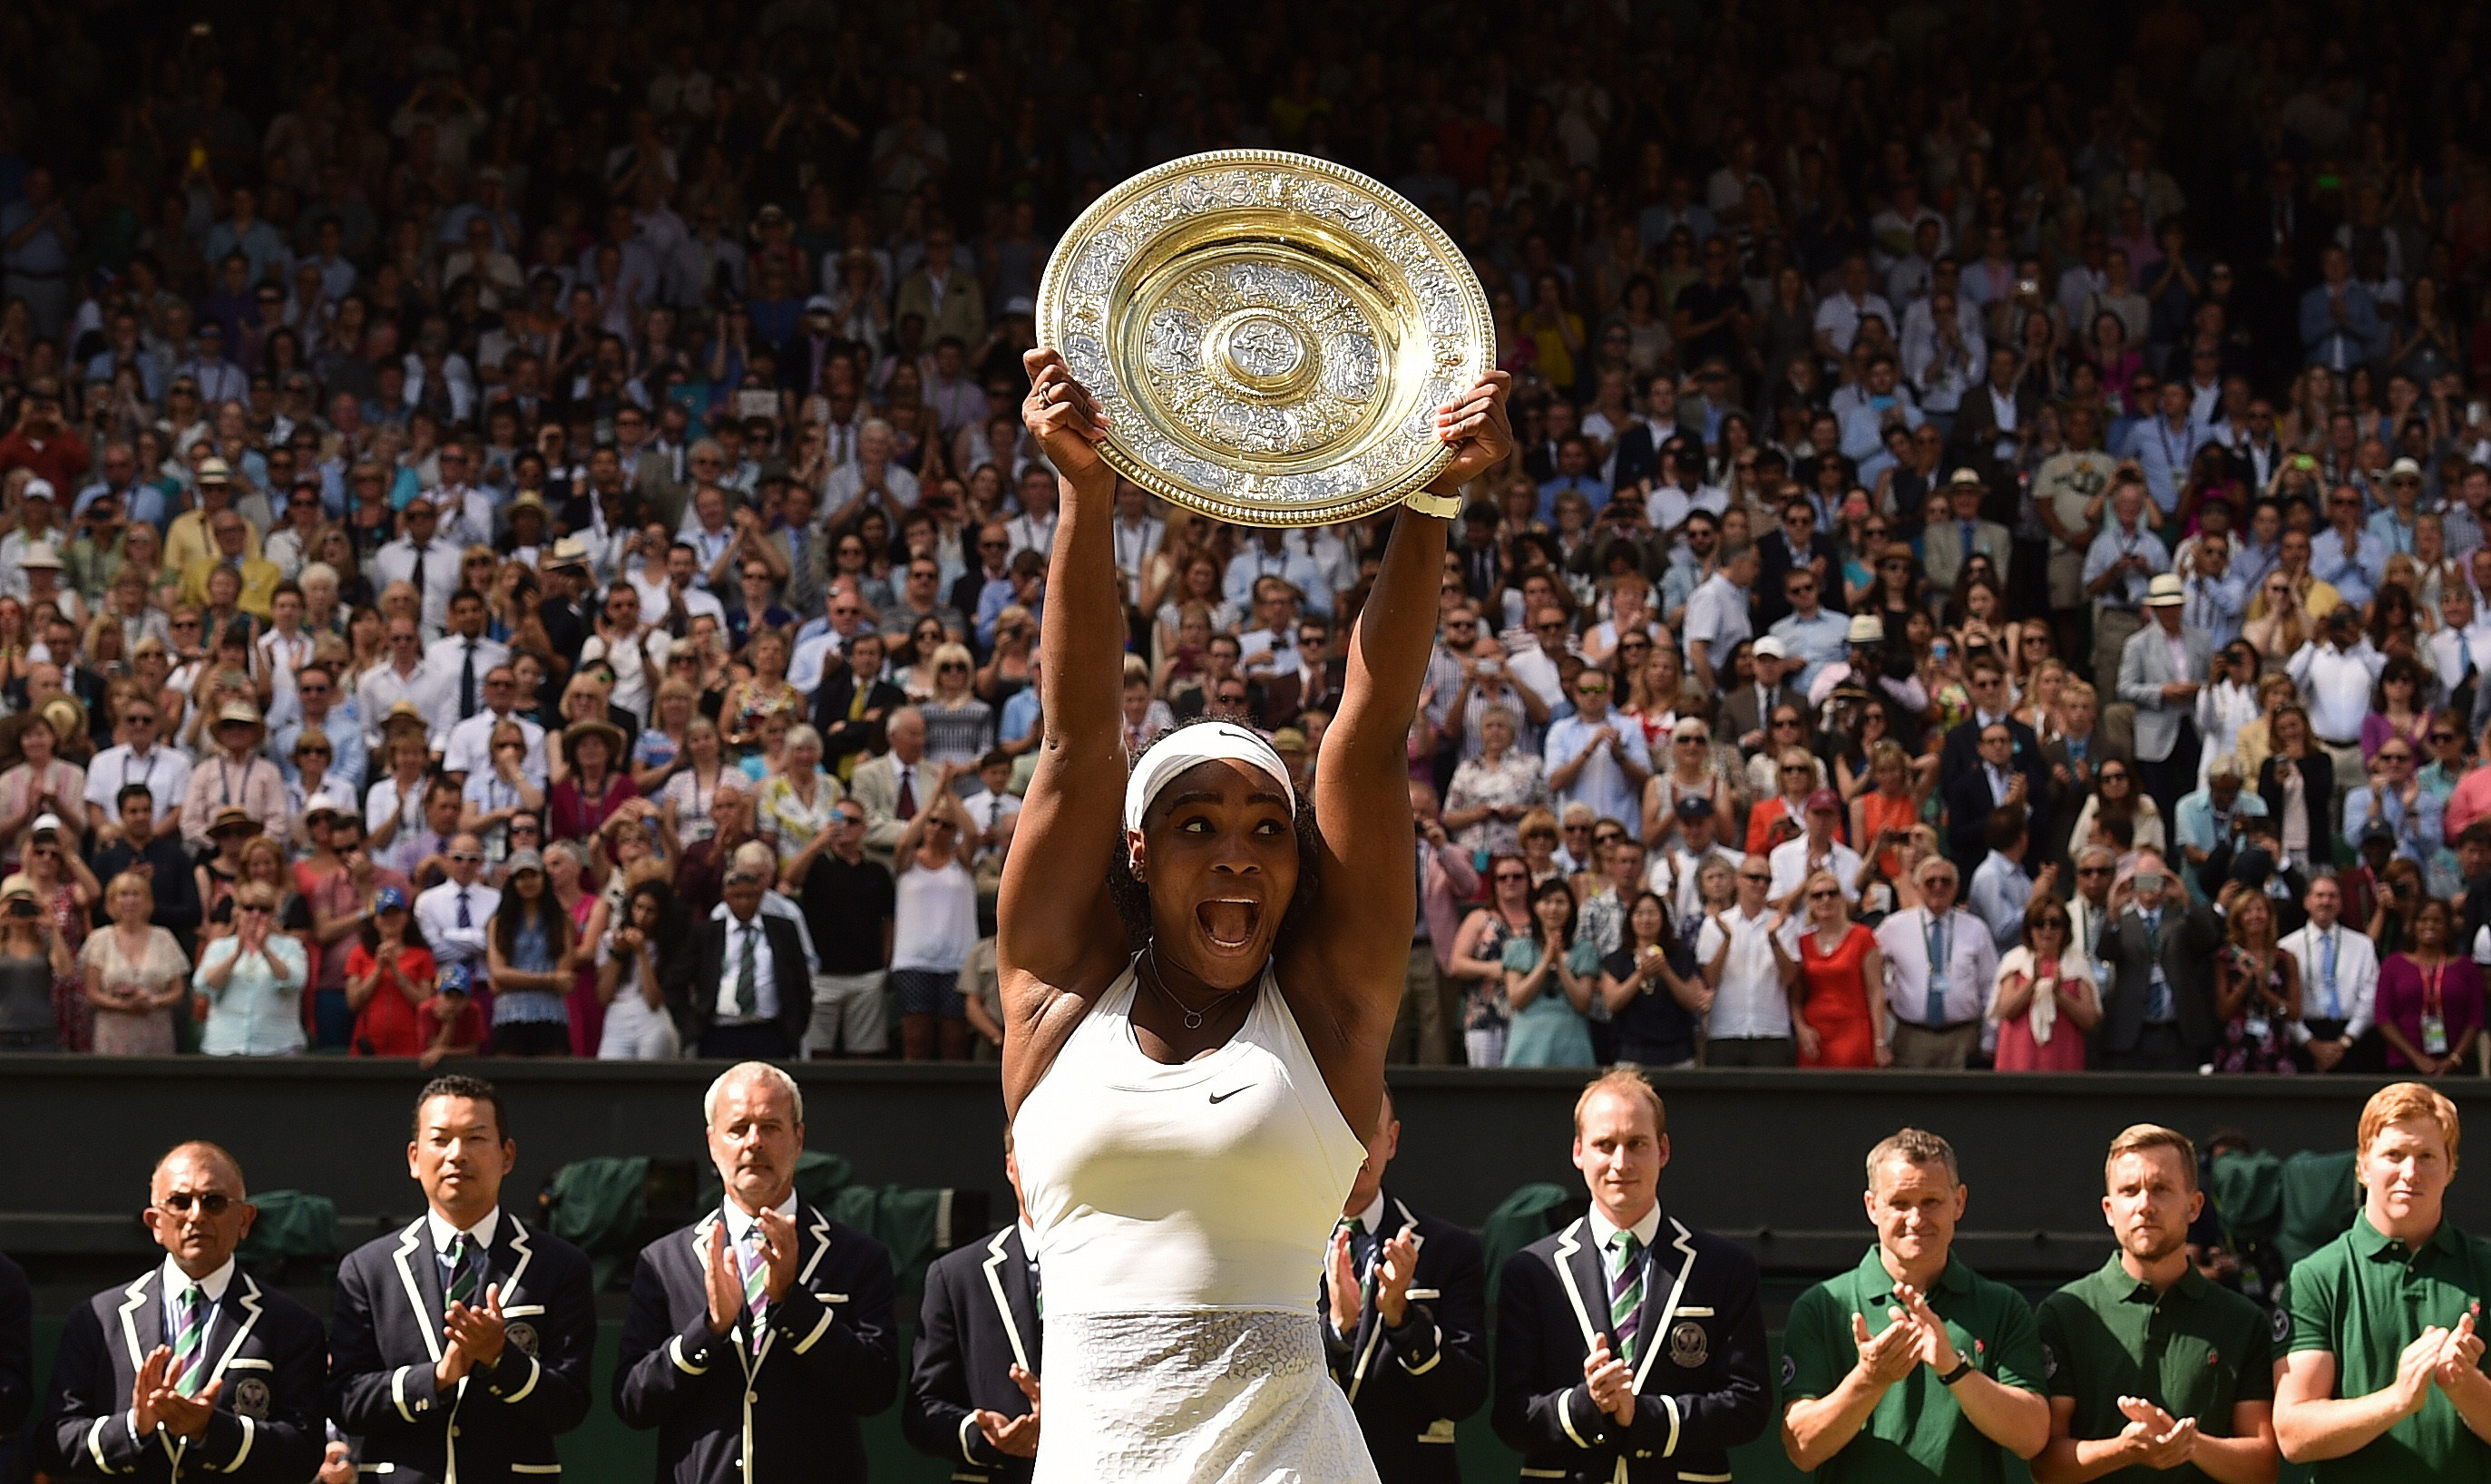 Serena Williams celebrates with the winner's trophy, the Venus Rosewater Dish, after her women's singles final victory over Spain's Garbine Muguruza on day twelve of the 2015 Wimbledon Championships at The All England Tennis Club in Wimbledon, southwest London on July 11, 2015. (Leon Neal—AFP/Getty Images)